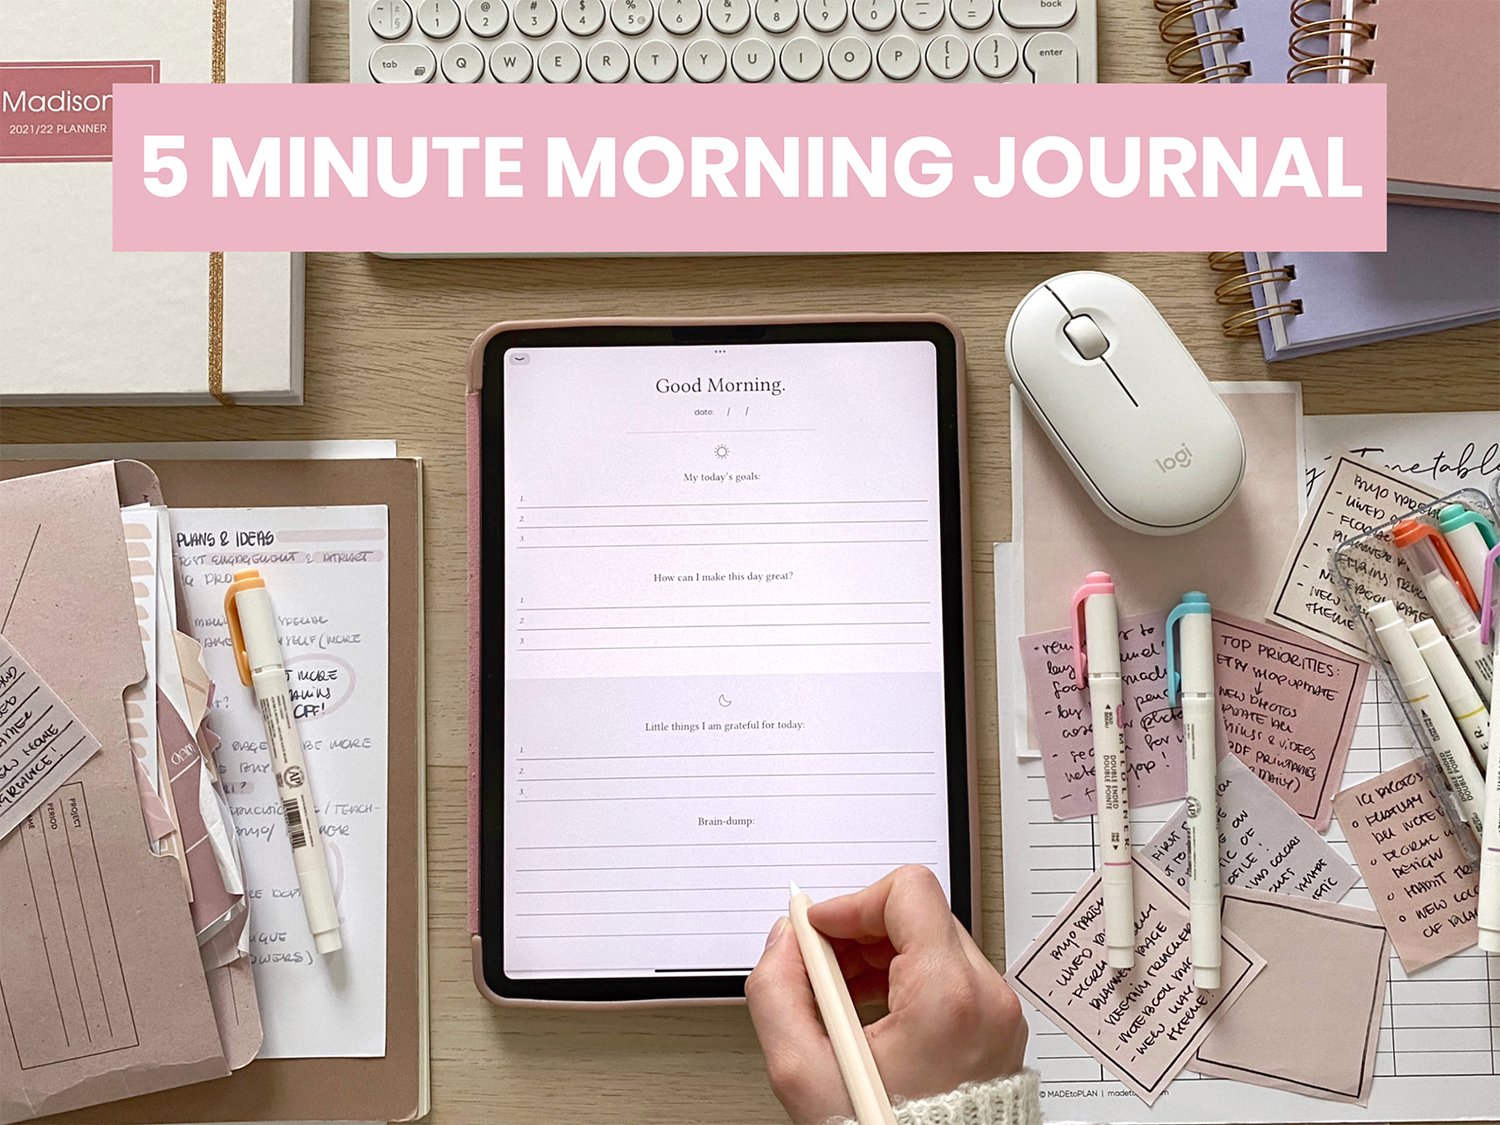 5 Minute Morning Journal — 2024 Digital Planners by MADEtoPLAN